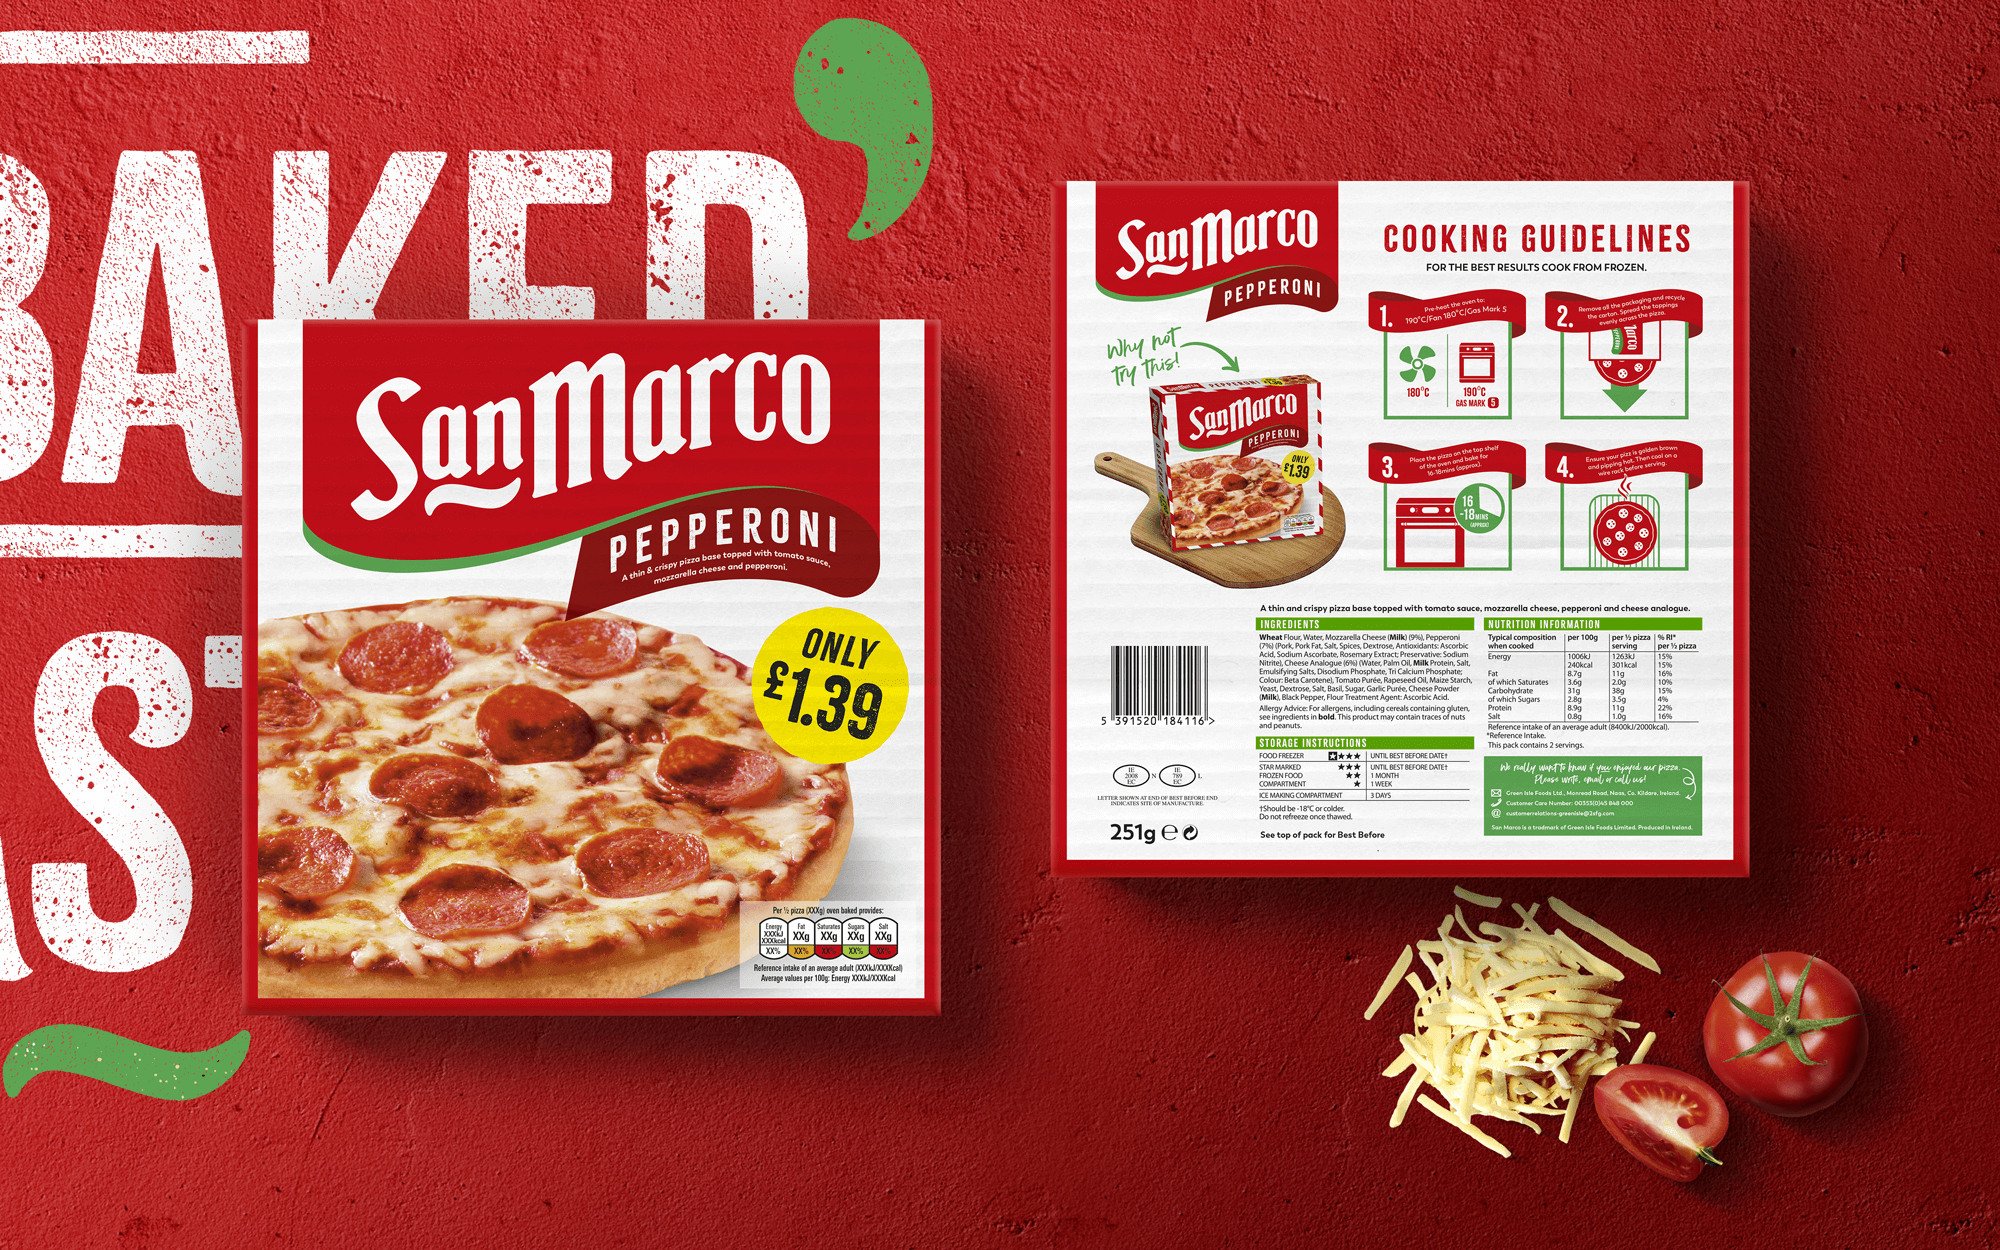 San marco pizza packaging